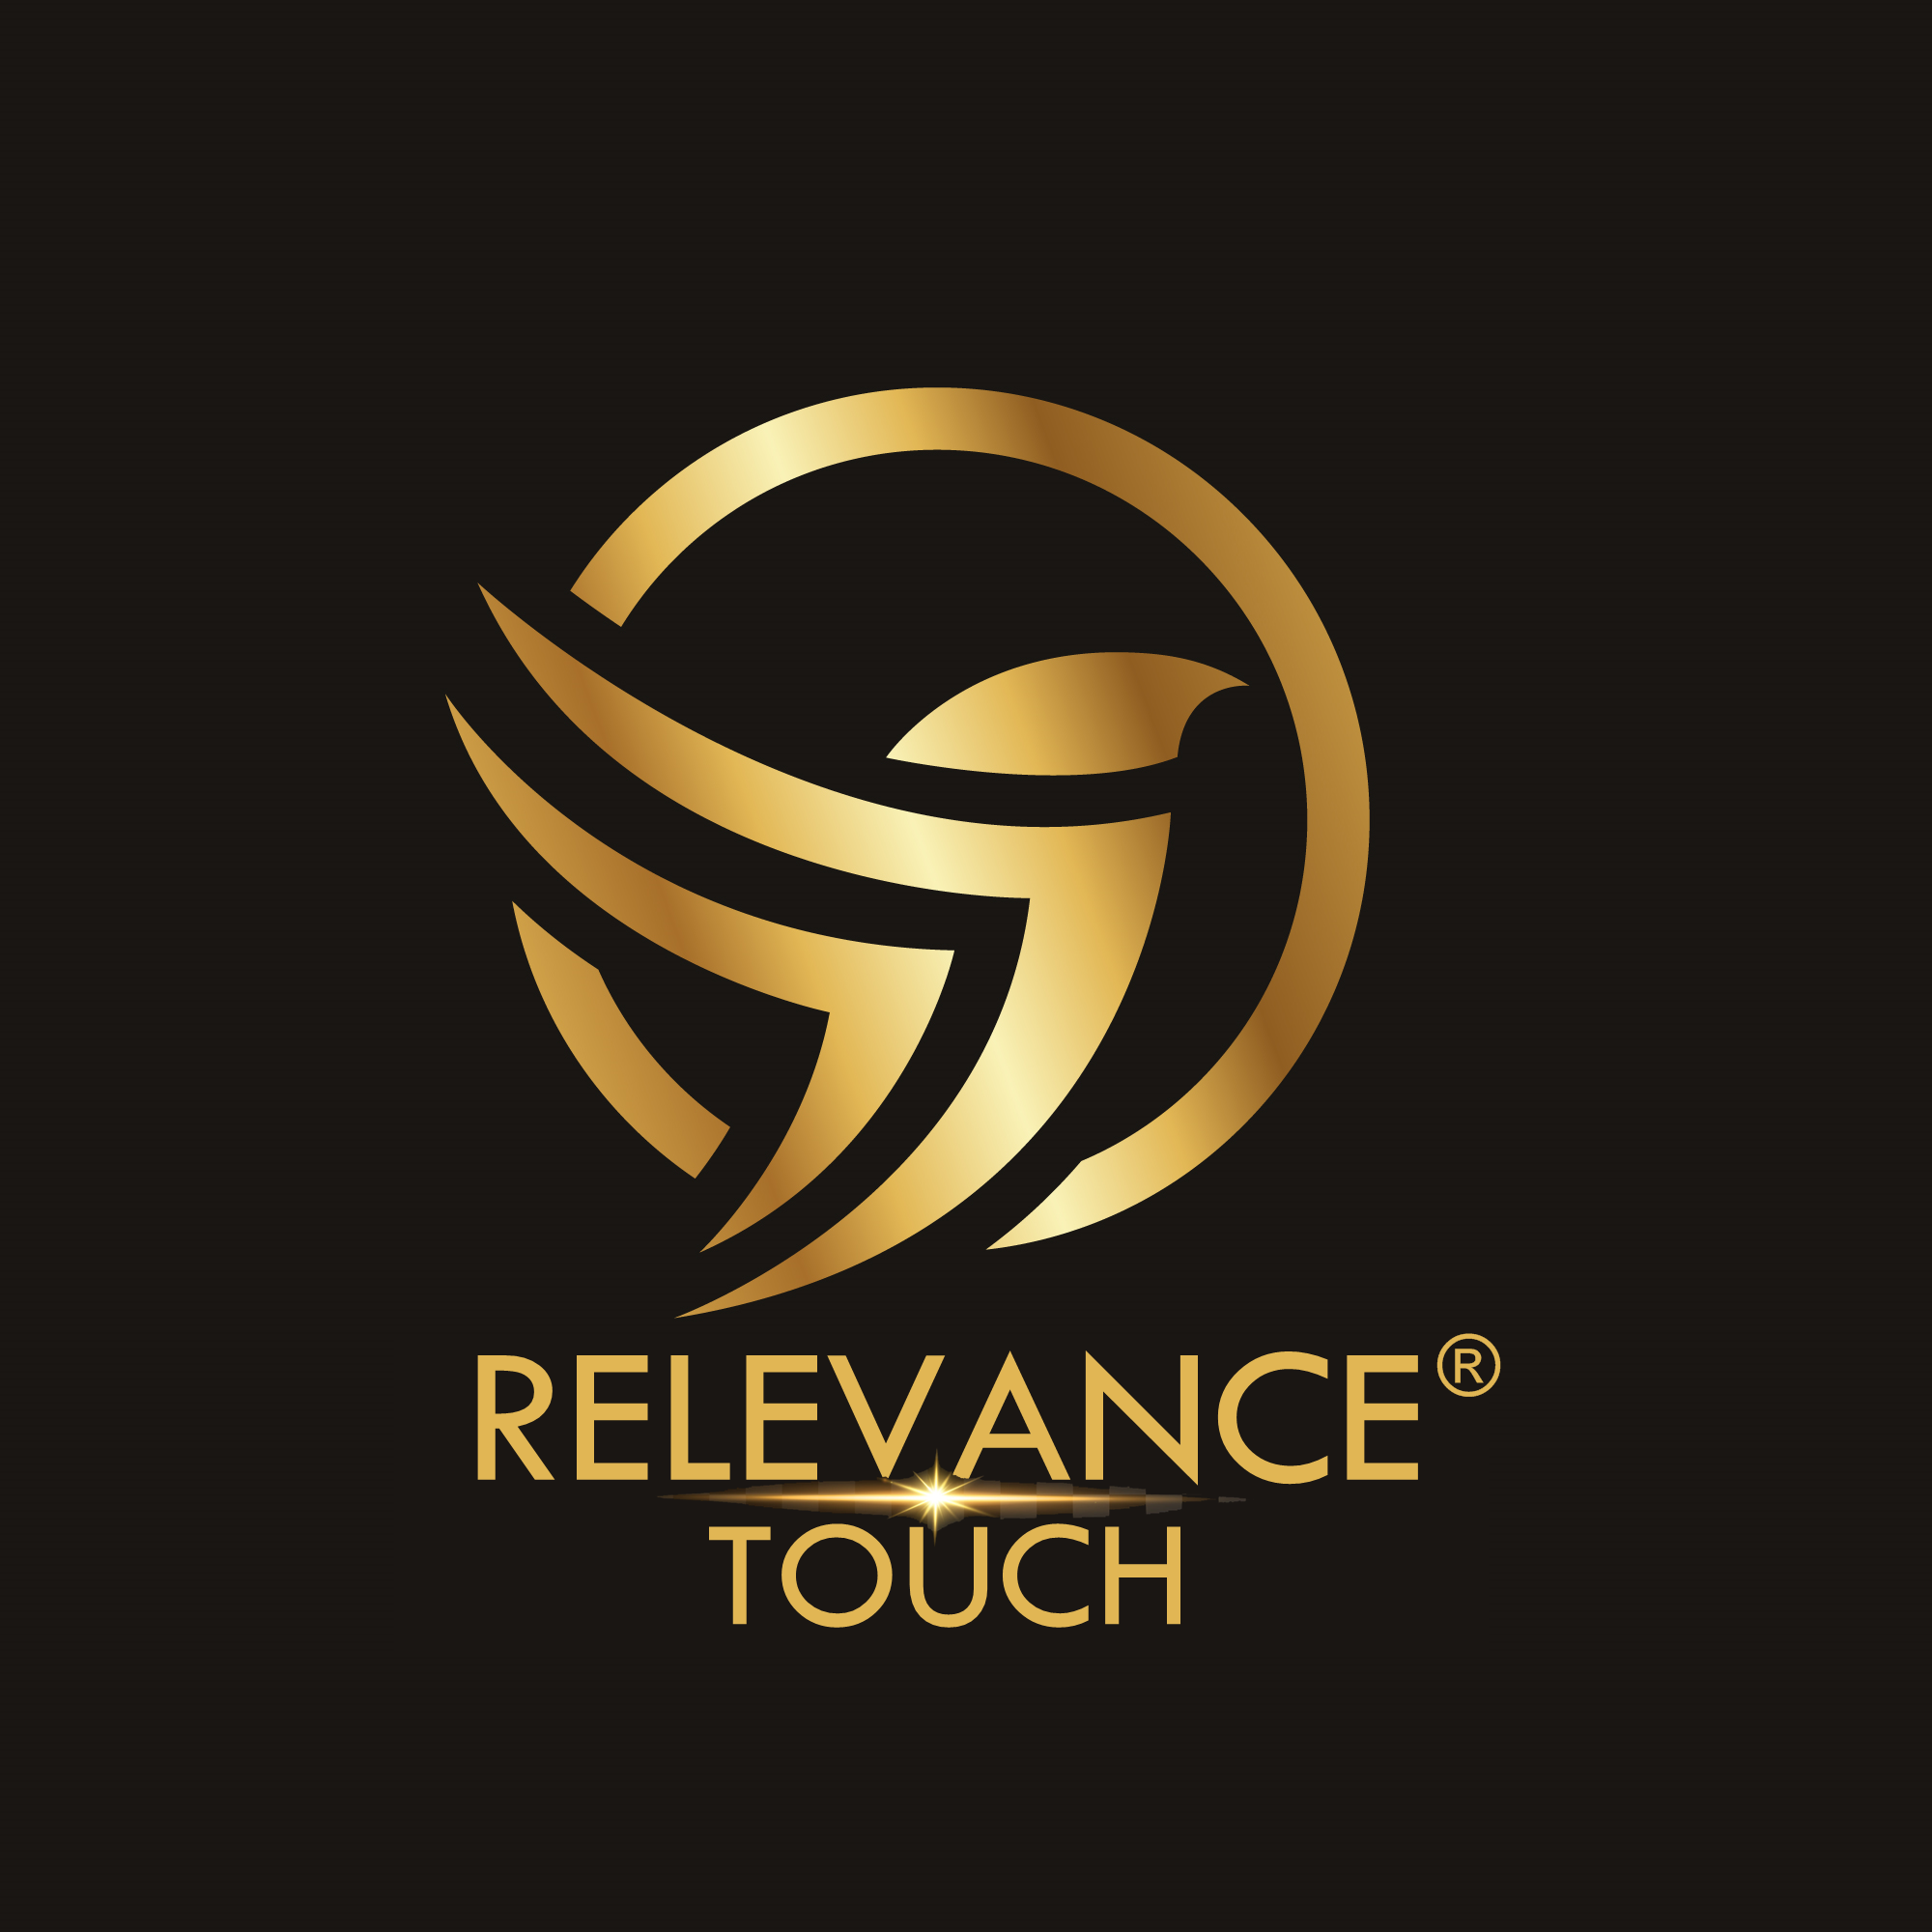 Relevance Touch